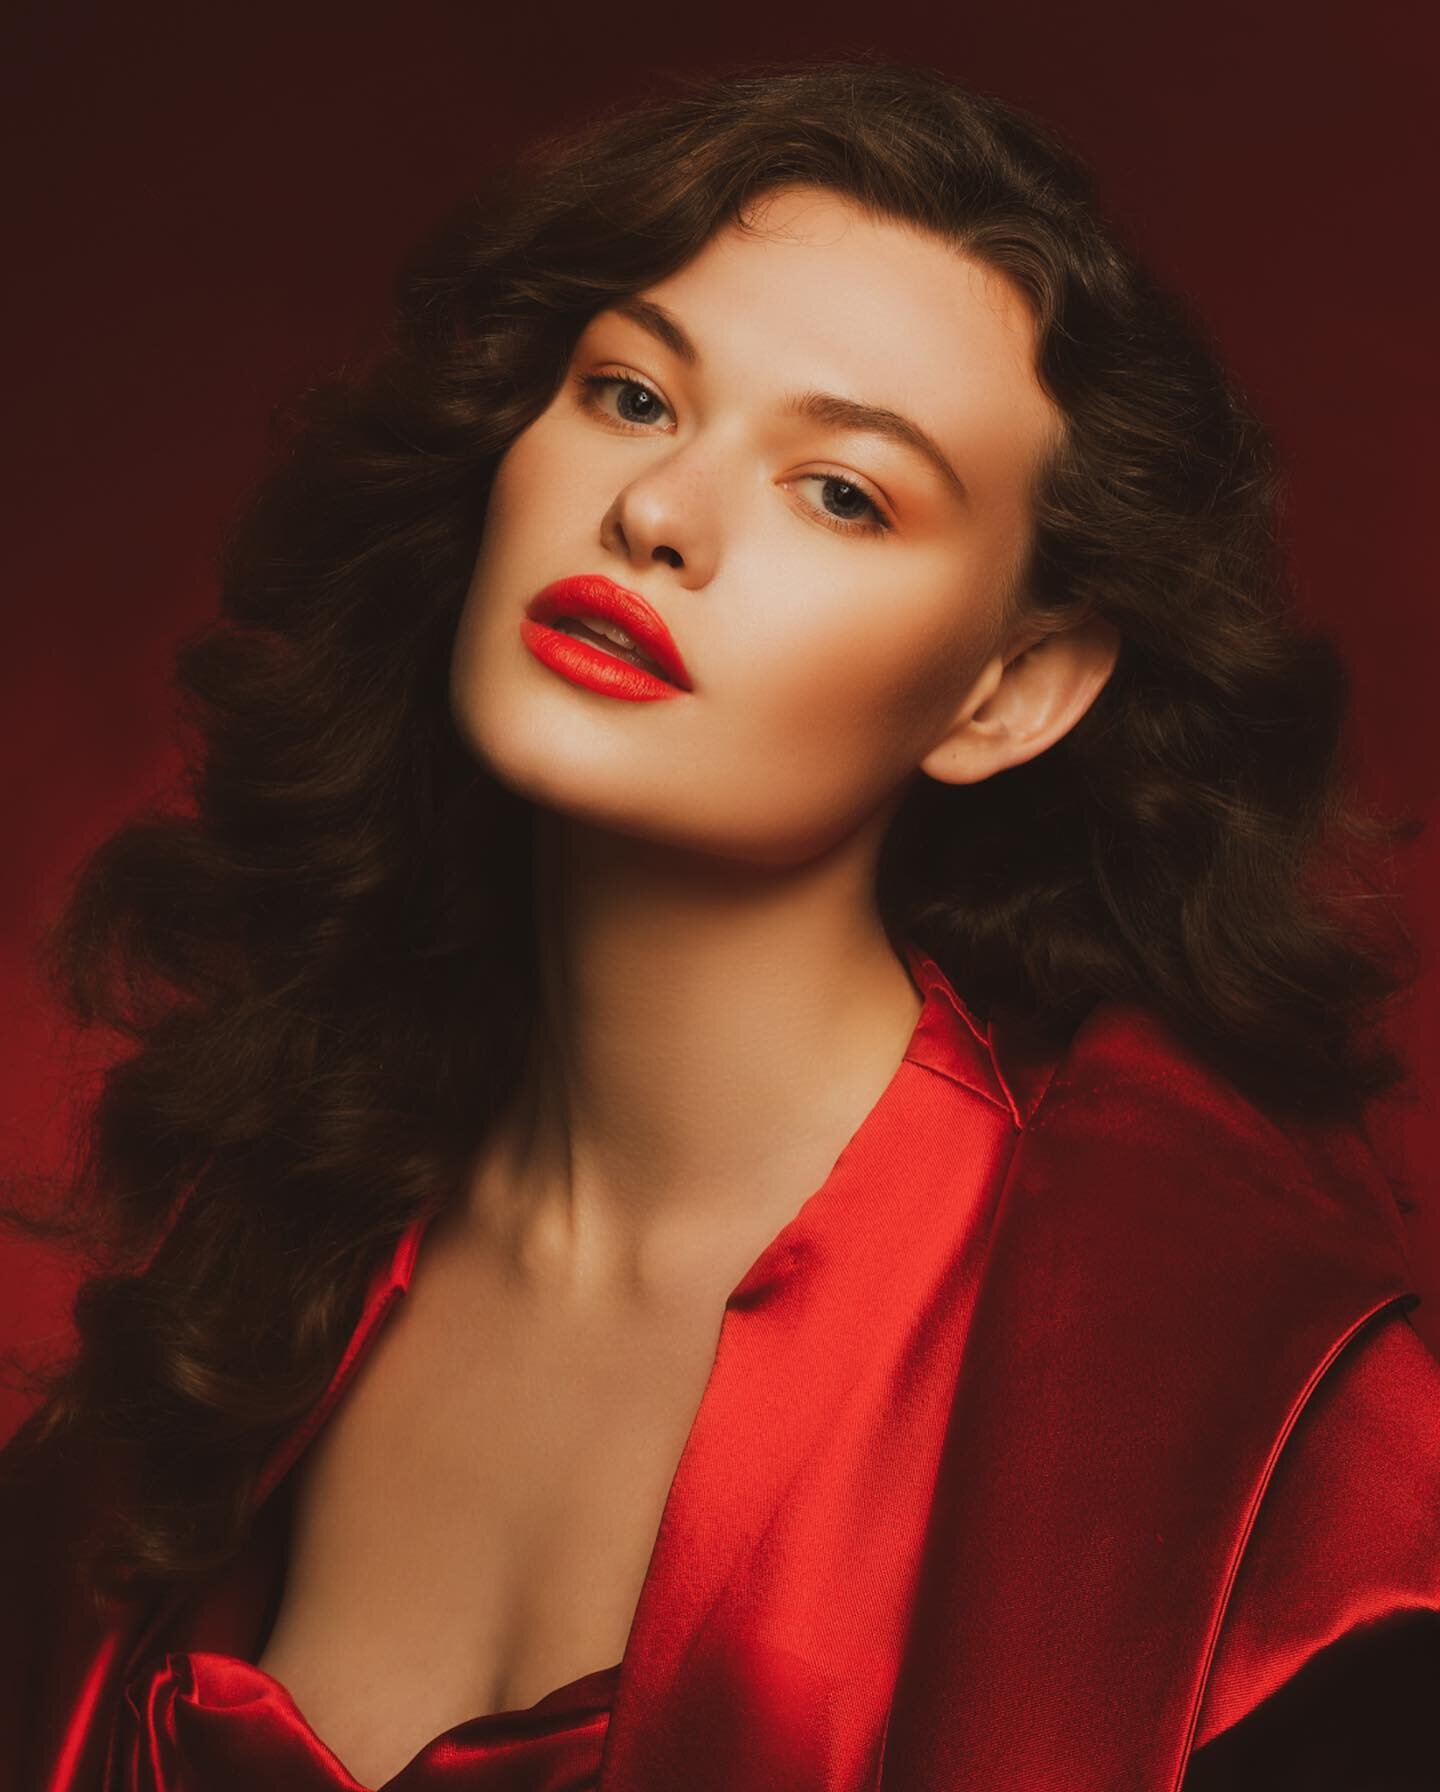 The beautiful @millyhimmelstein in red. 🌹❤️🎈💃🏻

In frame: @millyhimmelstein 
Concept: @lindsayadler_photo 
Wardrobe: @thecannonmediagroup 
Makeup: @joannegair 
Hair: @linhhair 
📷: @sonyalpha @sonyalphapro